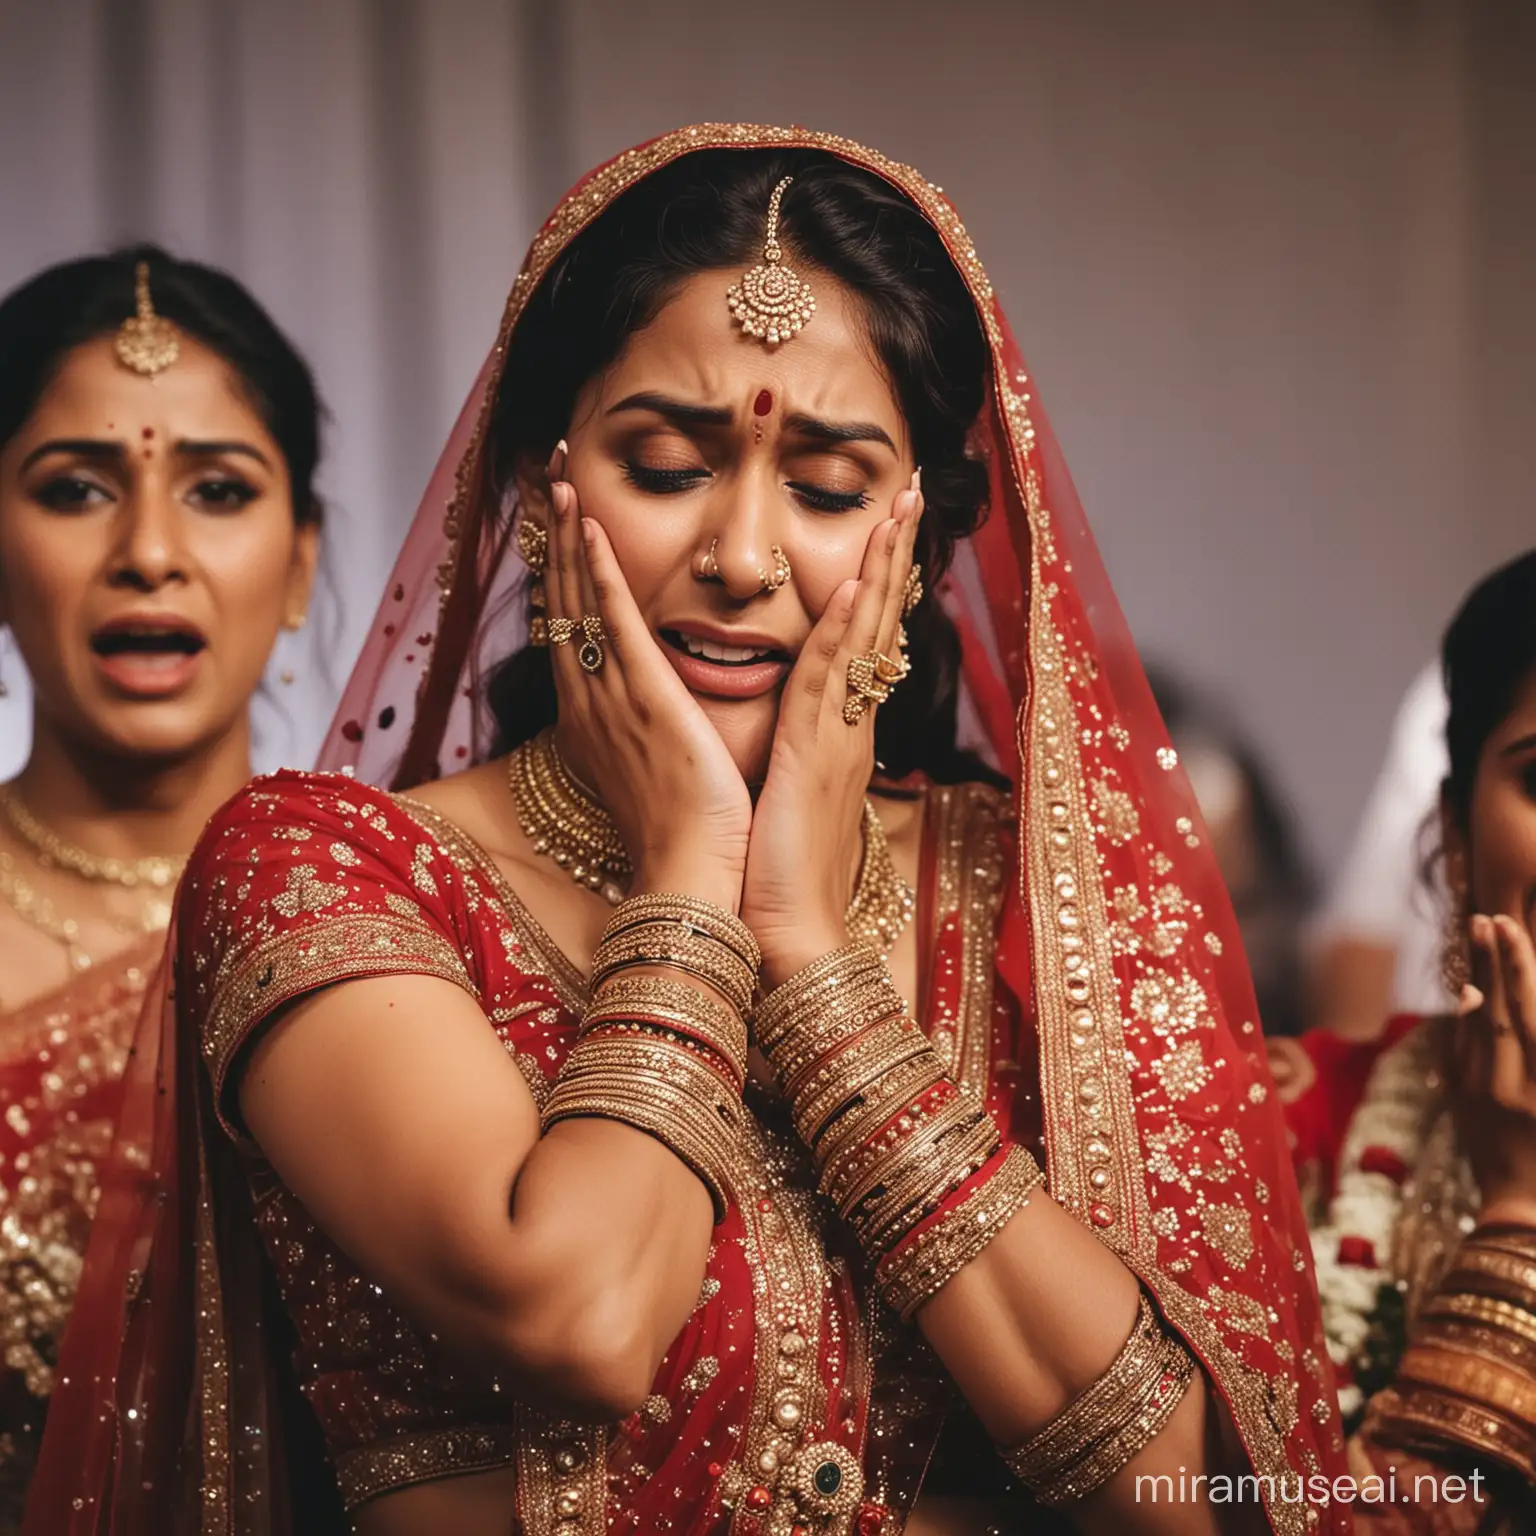 Indian Bride Expressing Emotions on Stage